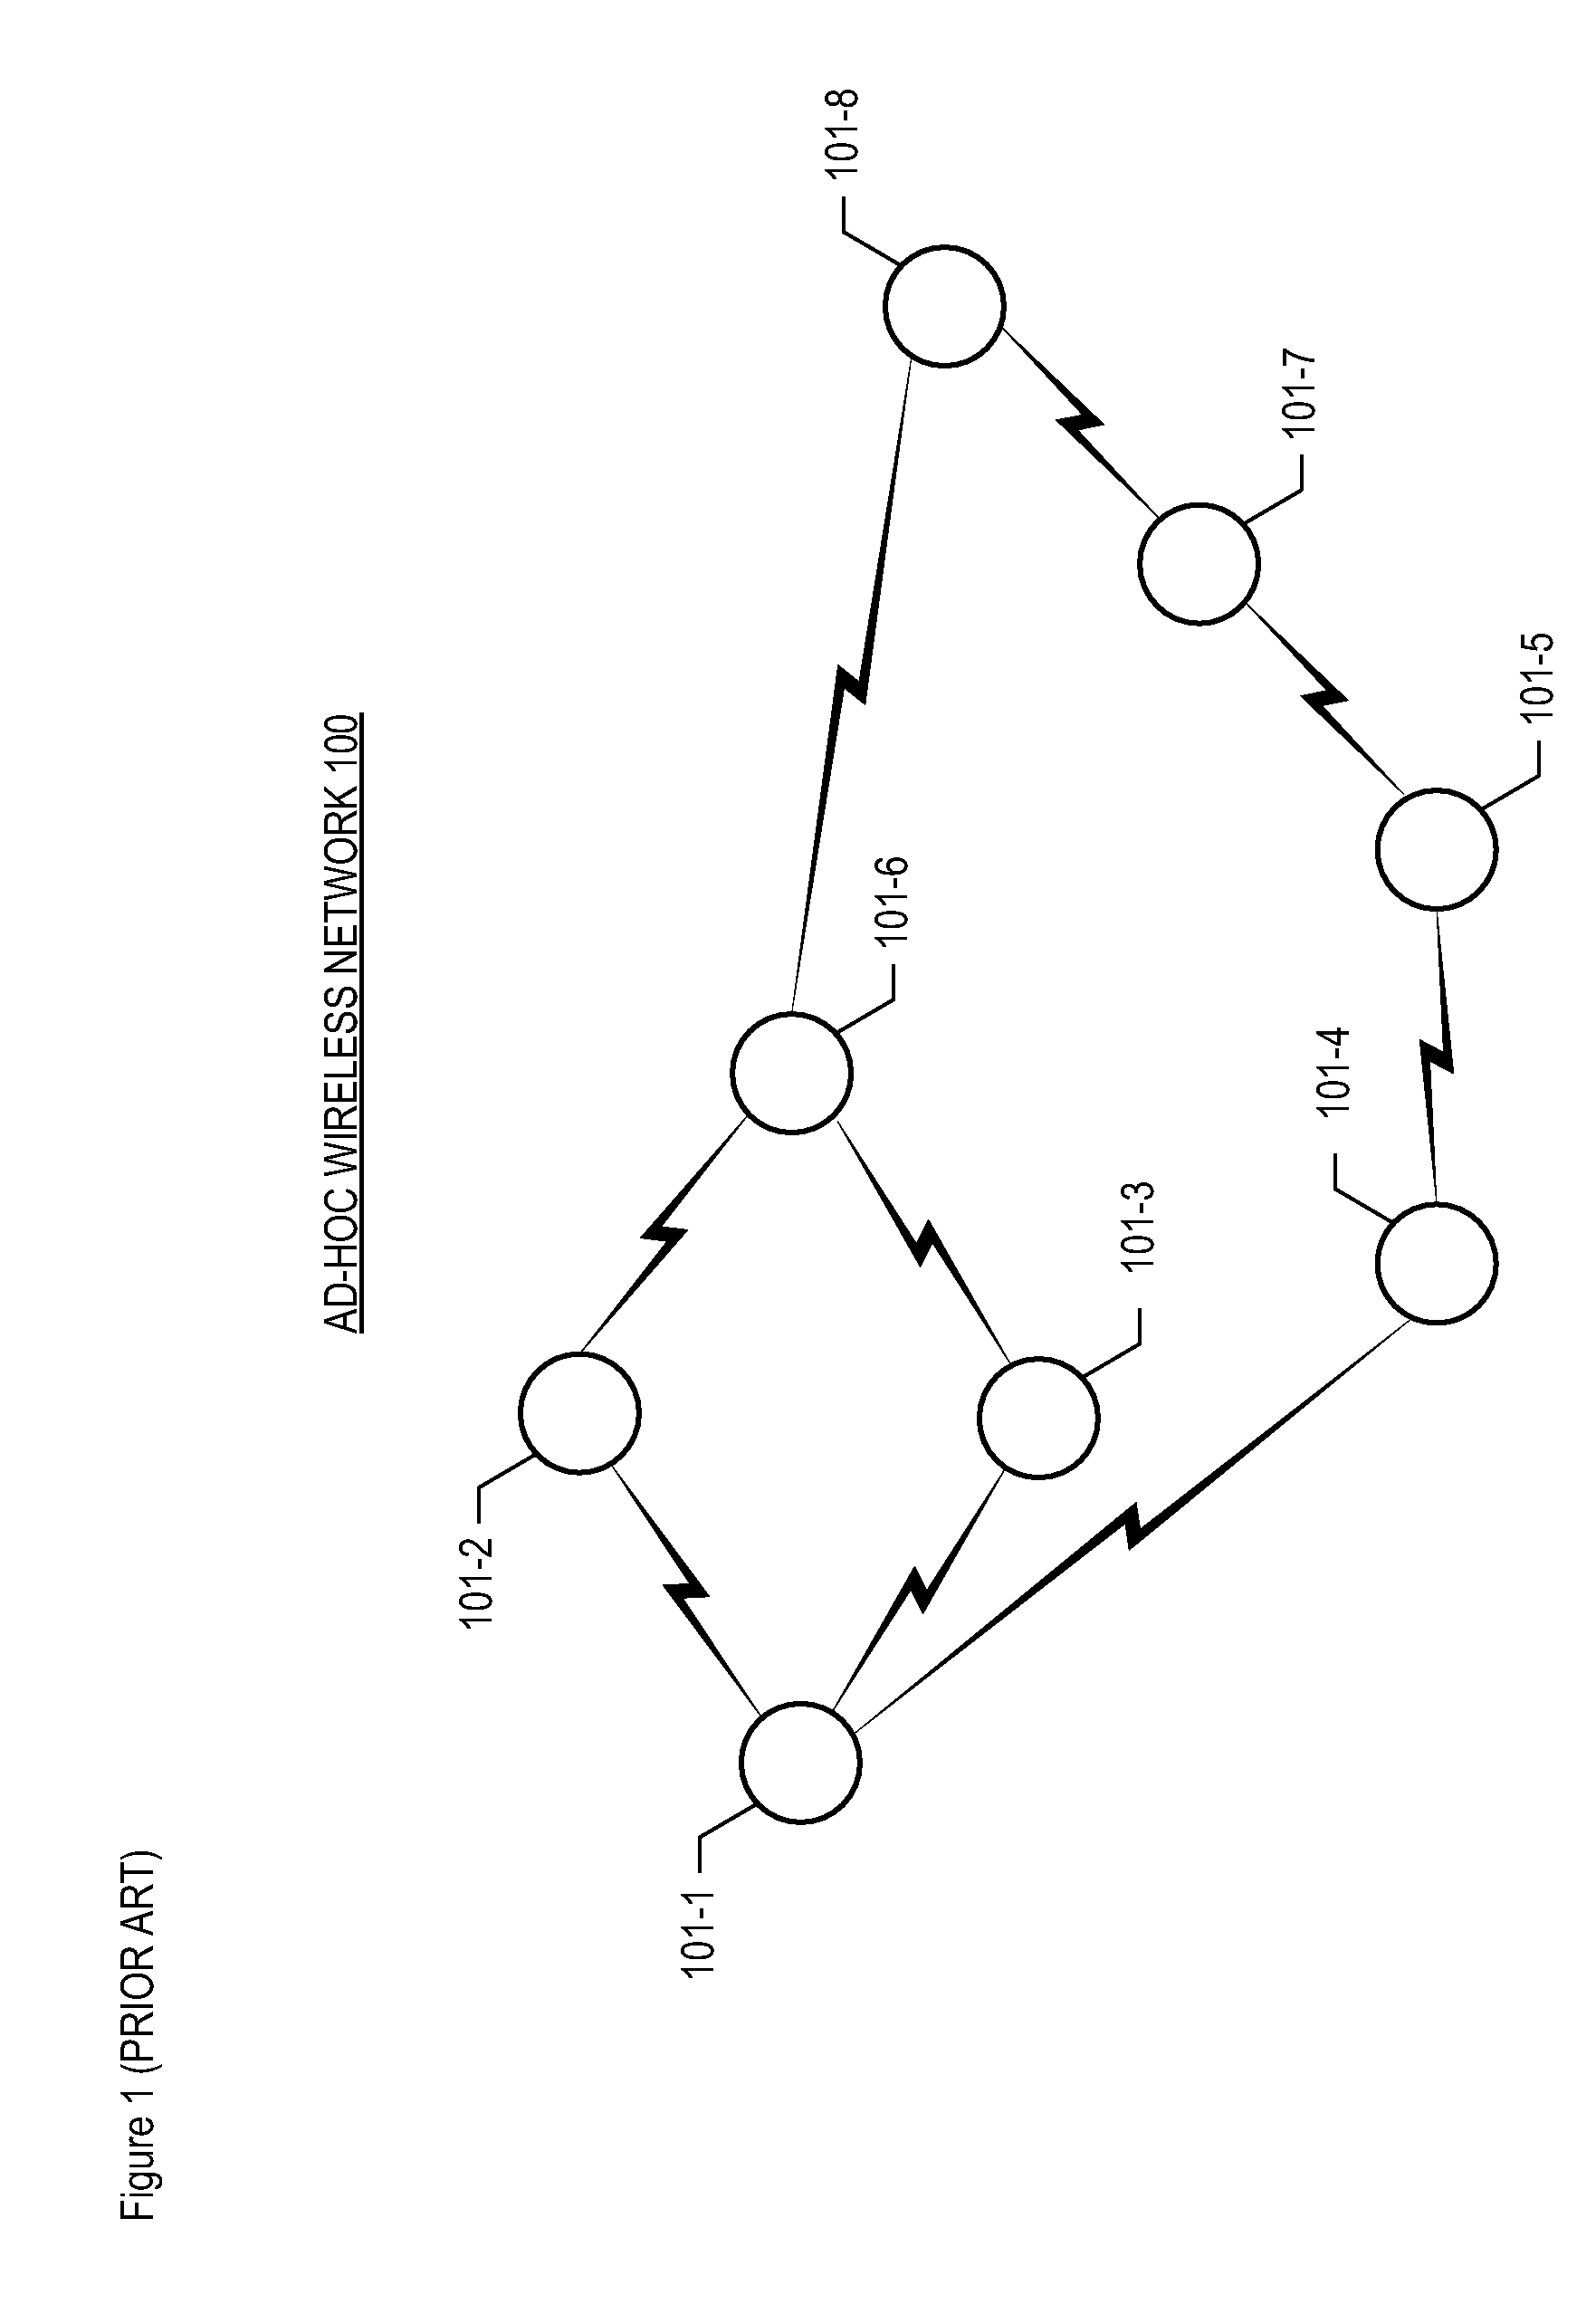 Load-Balancing Routes In Multi-Hop Ad-Hoc Wireless Networks